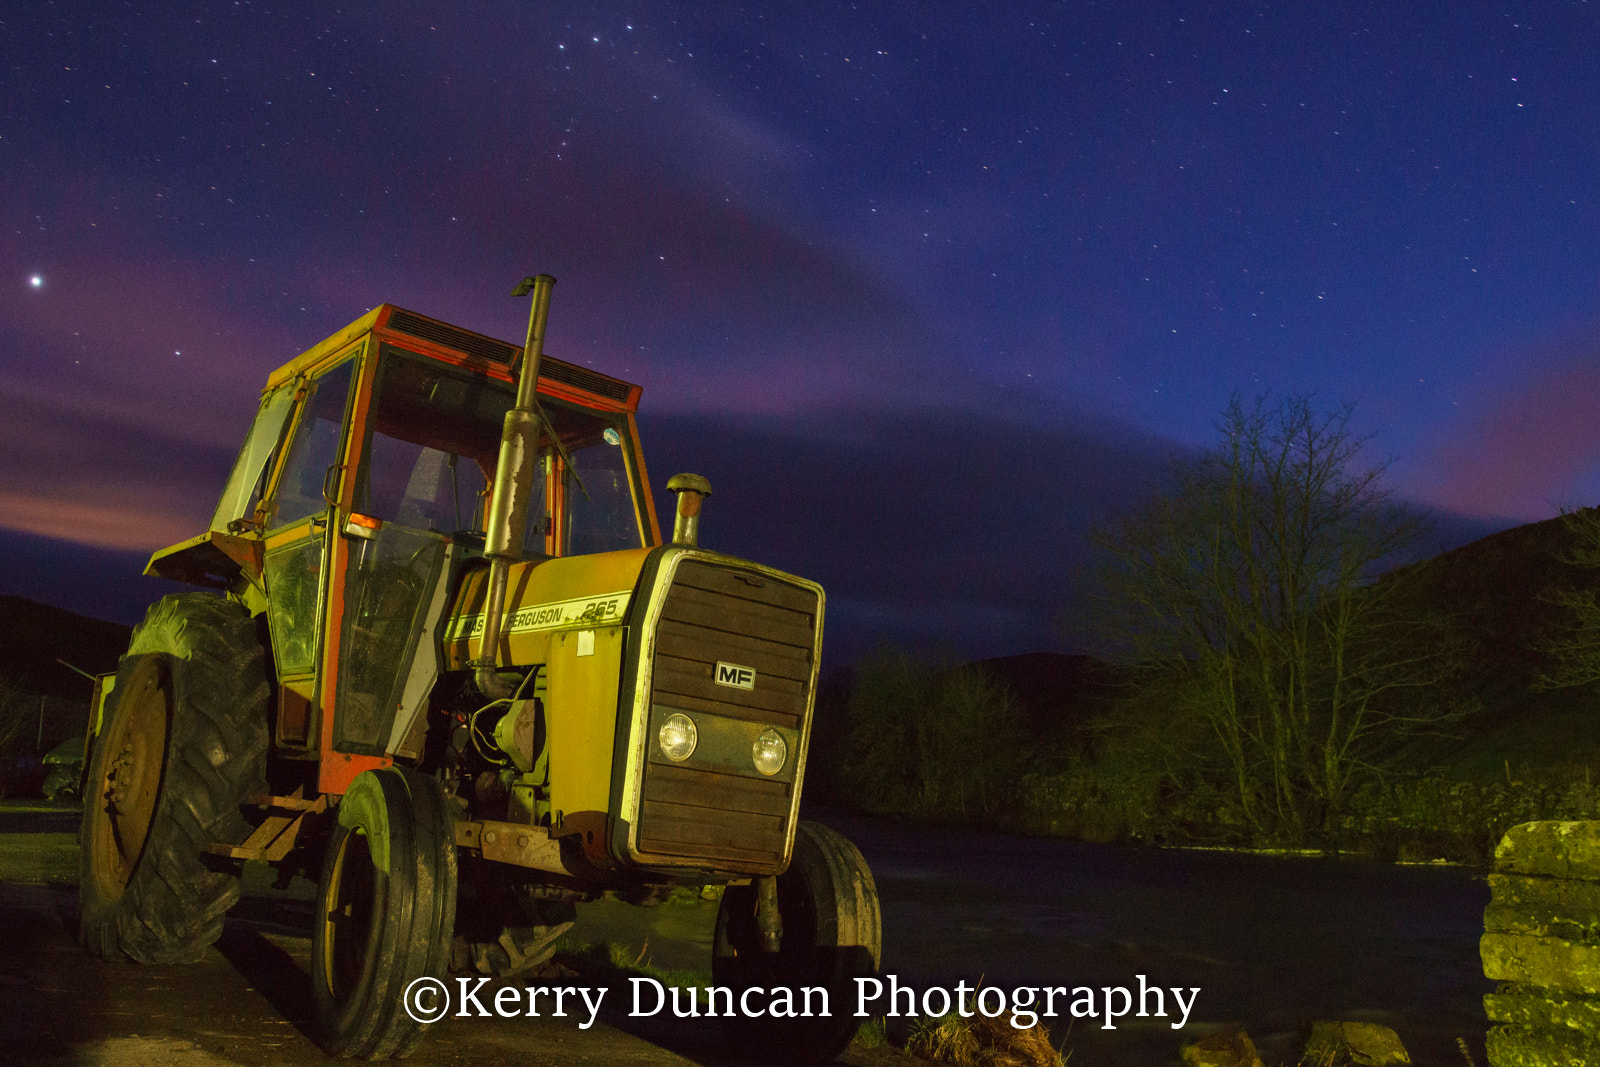 17-50mm F2.8 sample photo. Night tractor photography